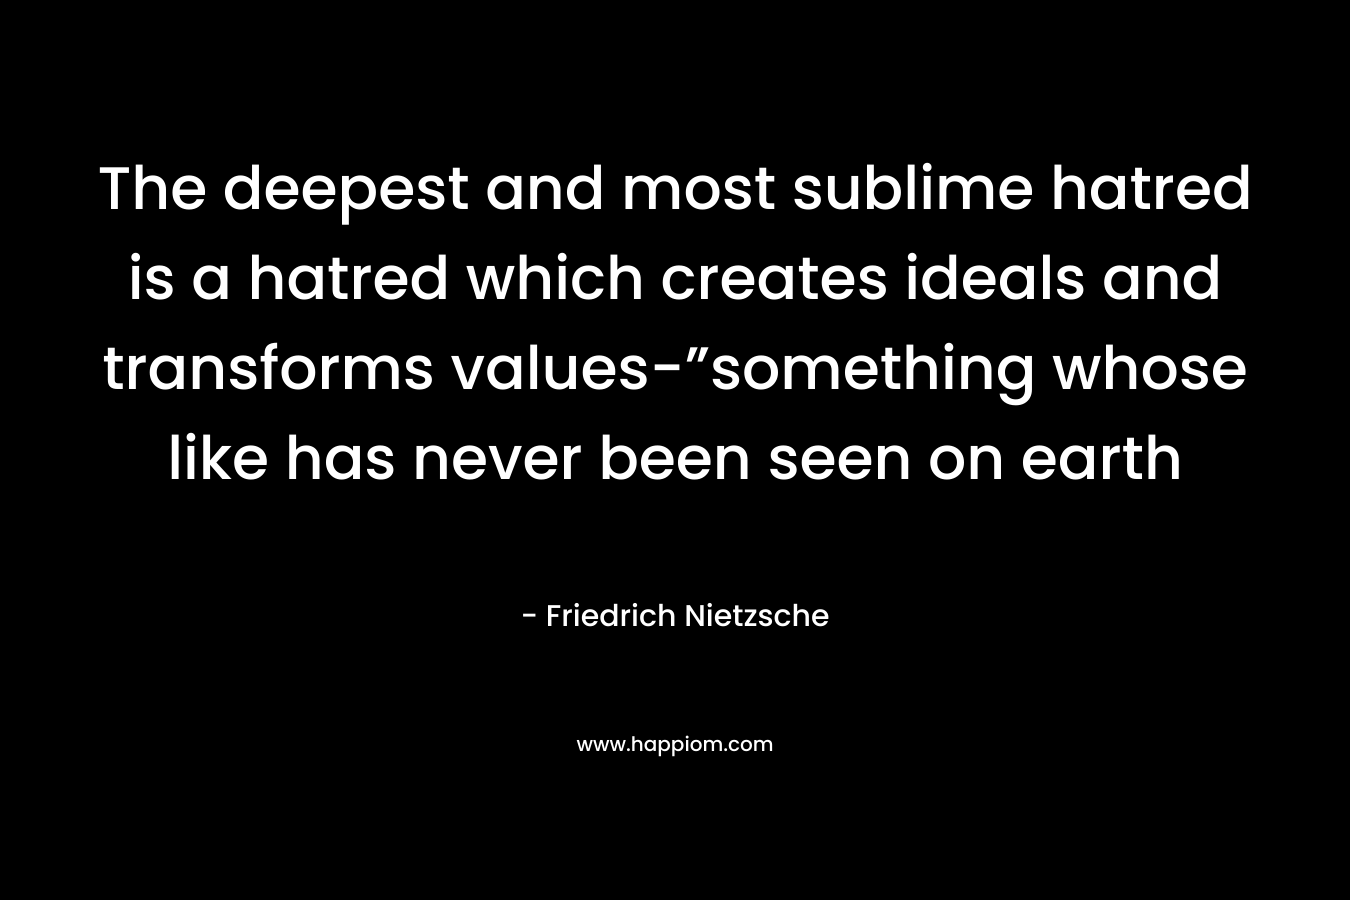 The deepest and most sublime hatred is a hatred which creates ideals and transforms values-”something whose like has never been seen on earth